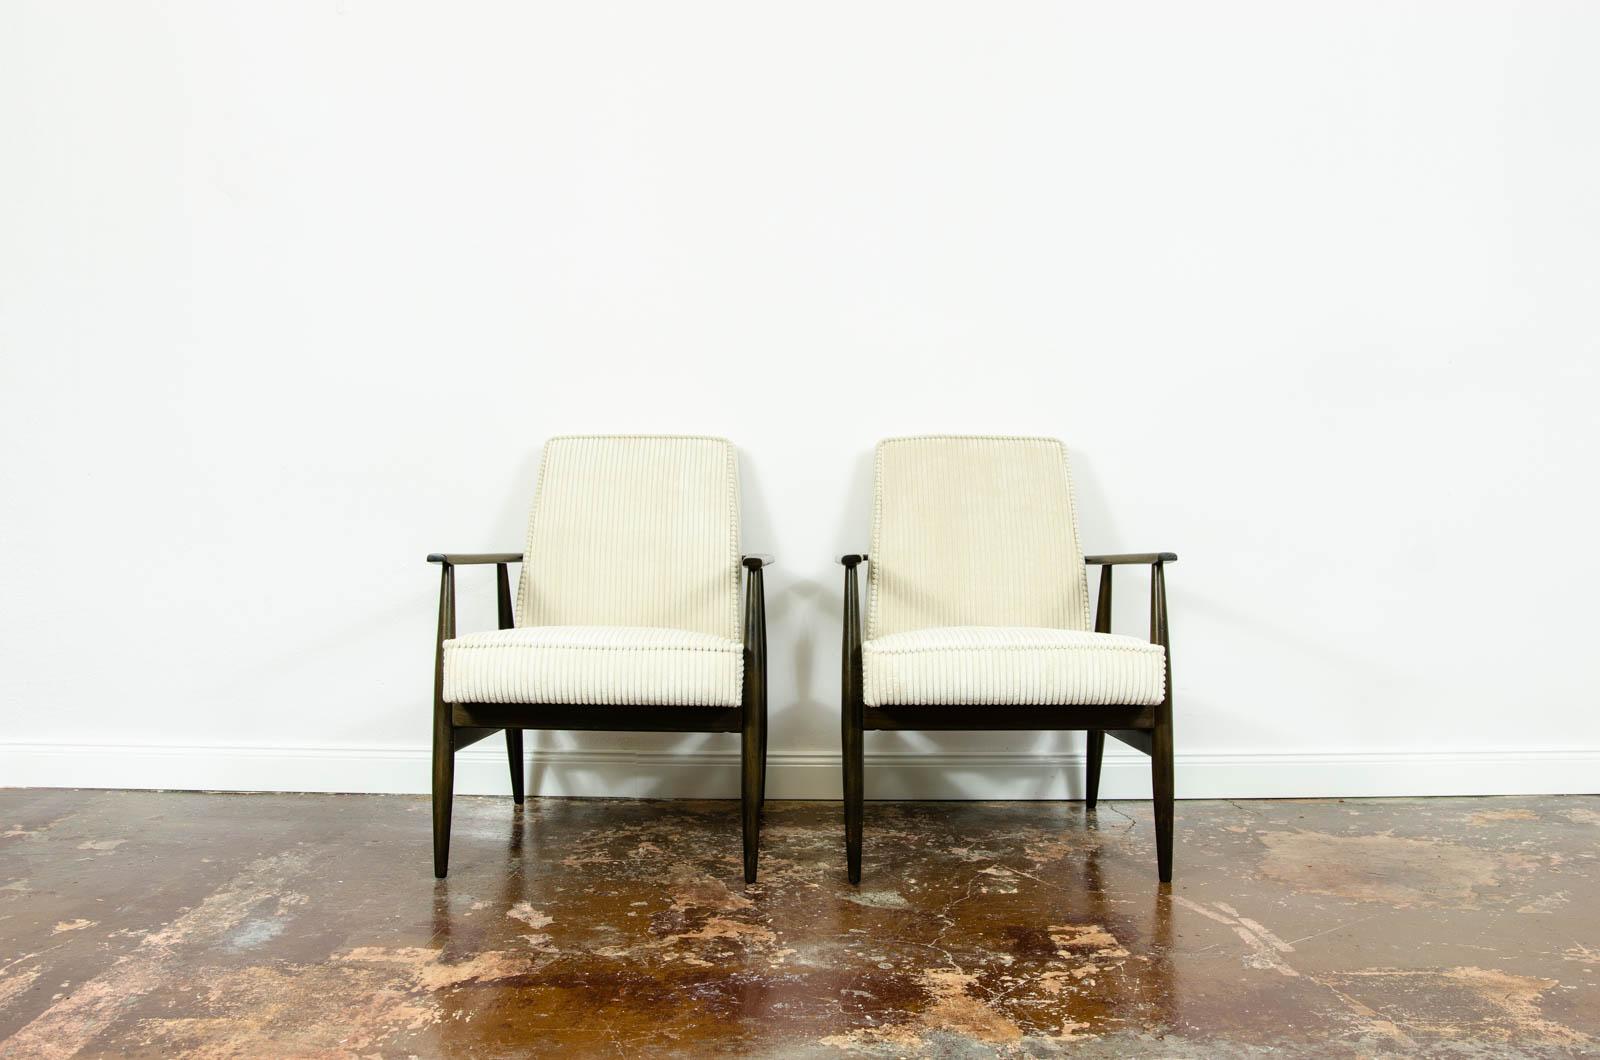 Pair of mid-century armchairs, type 300-190 designed by H. Lis, manufactured in Poland, 1960's.
Reupholstered in cream corduroy. 
Solid wood frames have been completely restored and refinished.
We offer fabric customization upon request.